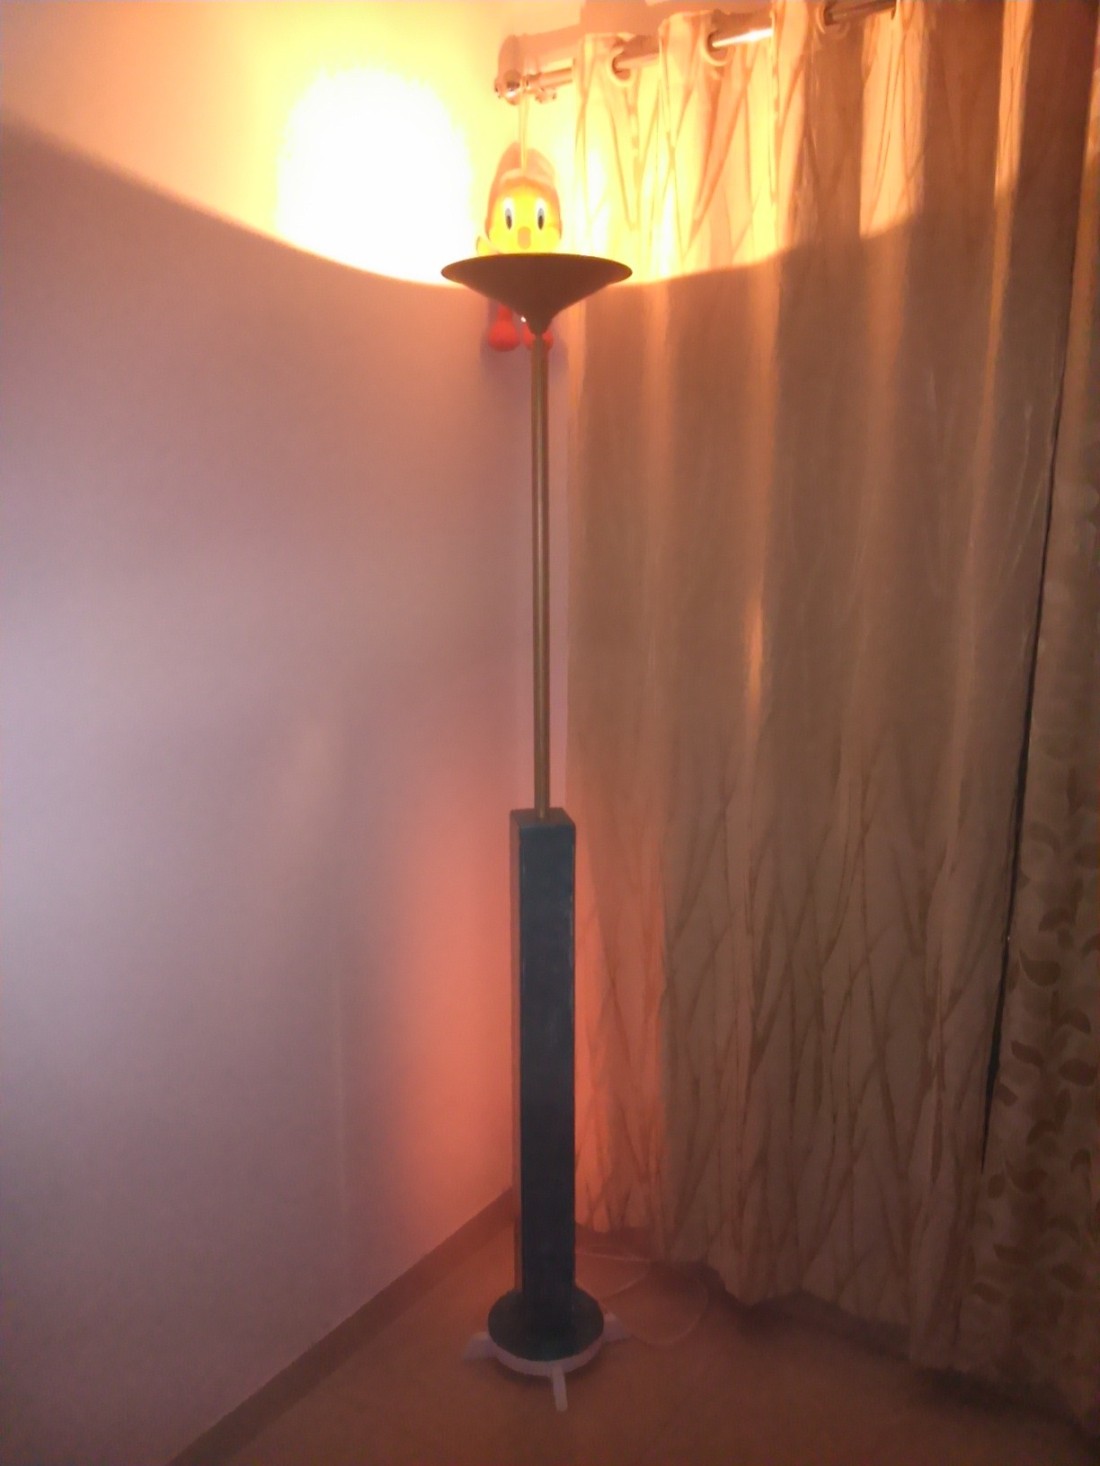 The completed tall lamp